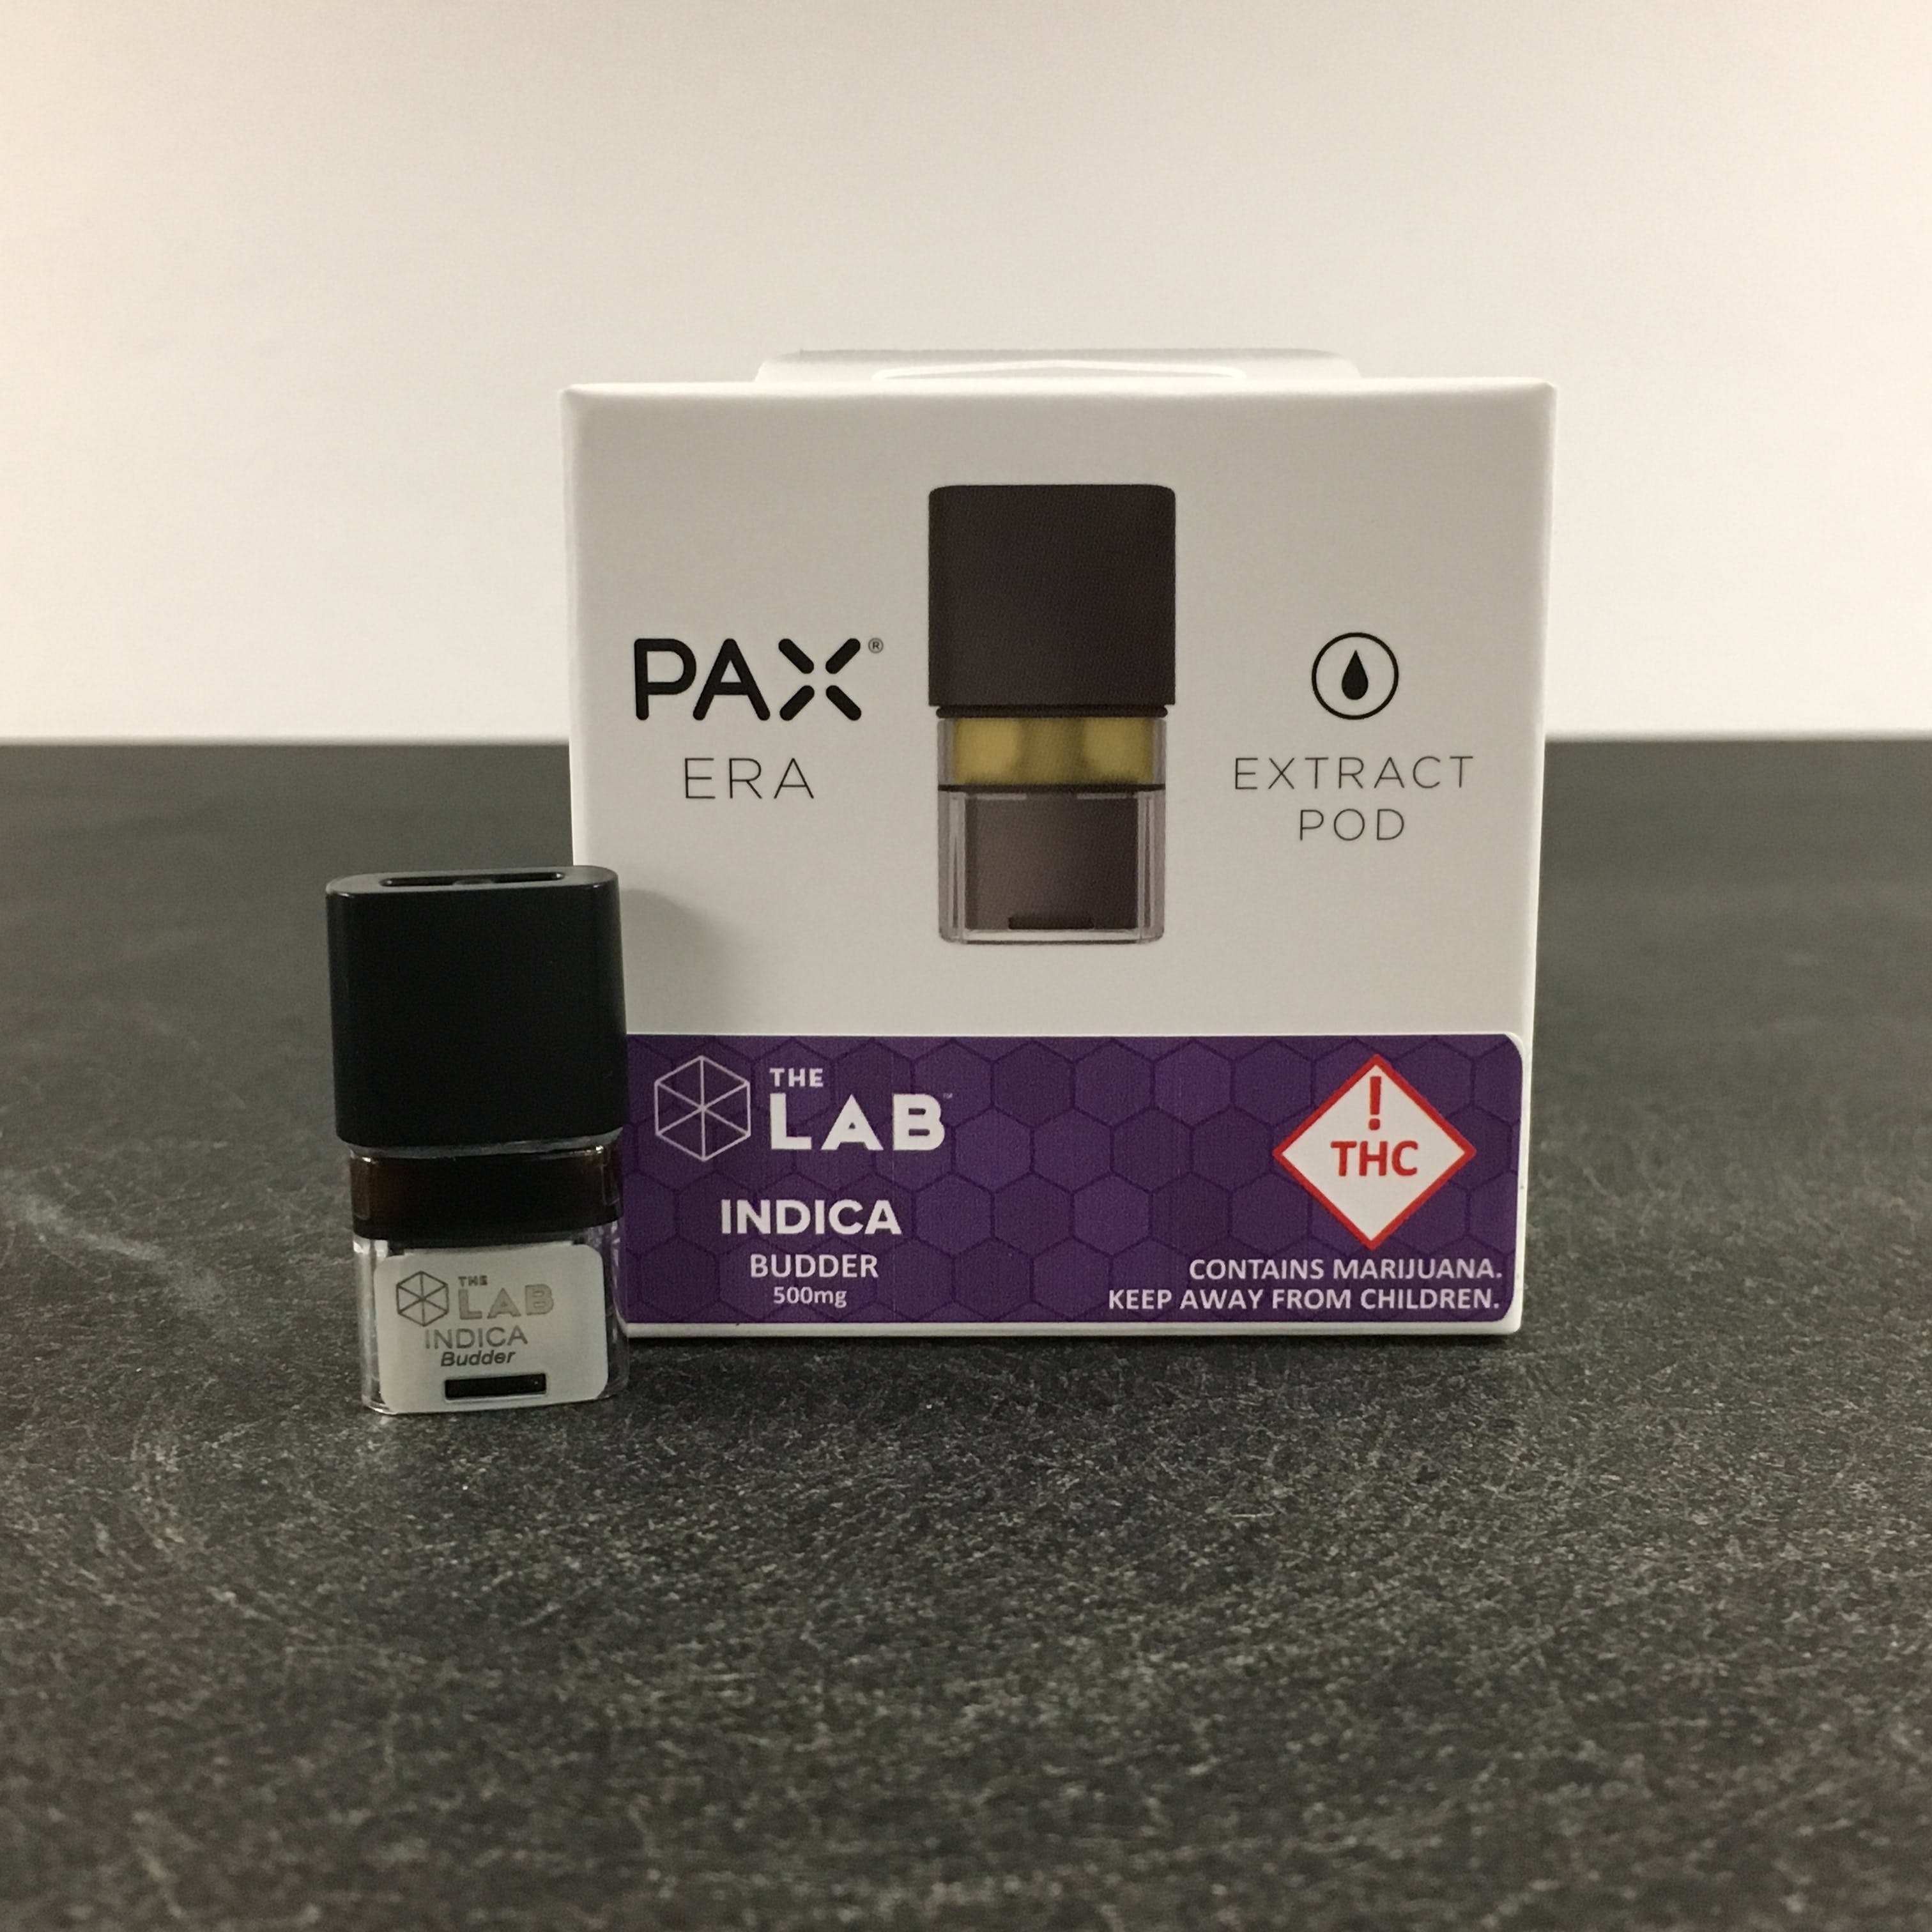 concentrate-pax-era-2c-indica-budder-2c-500mg